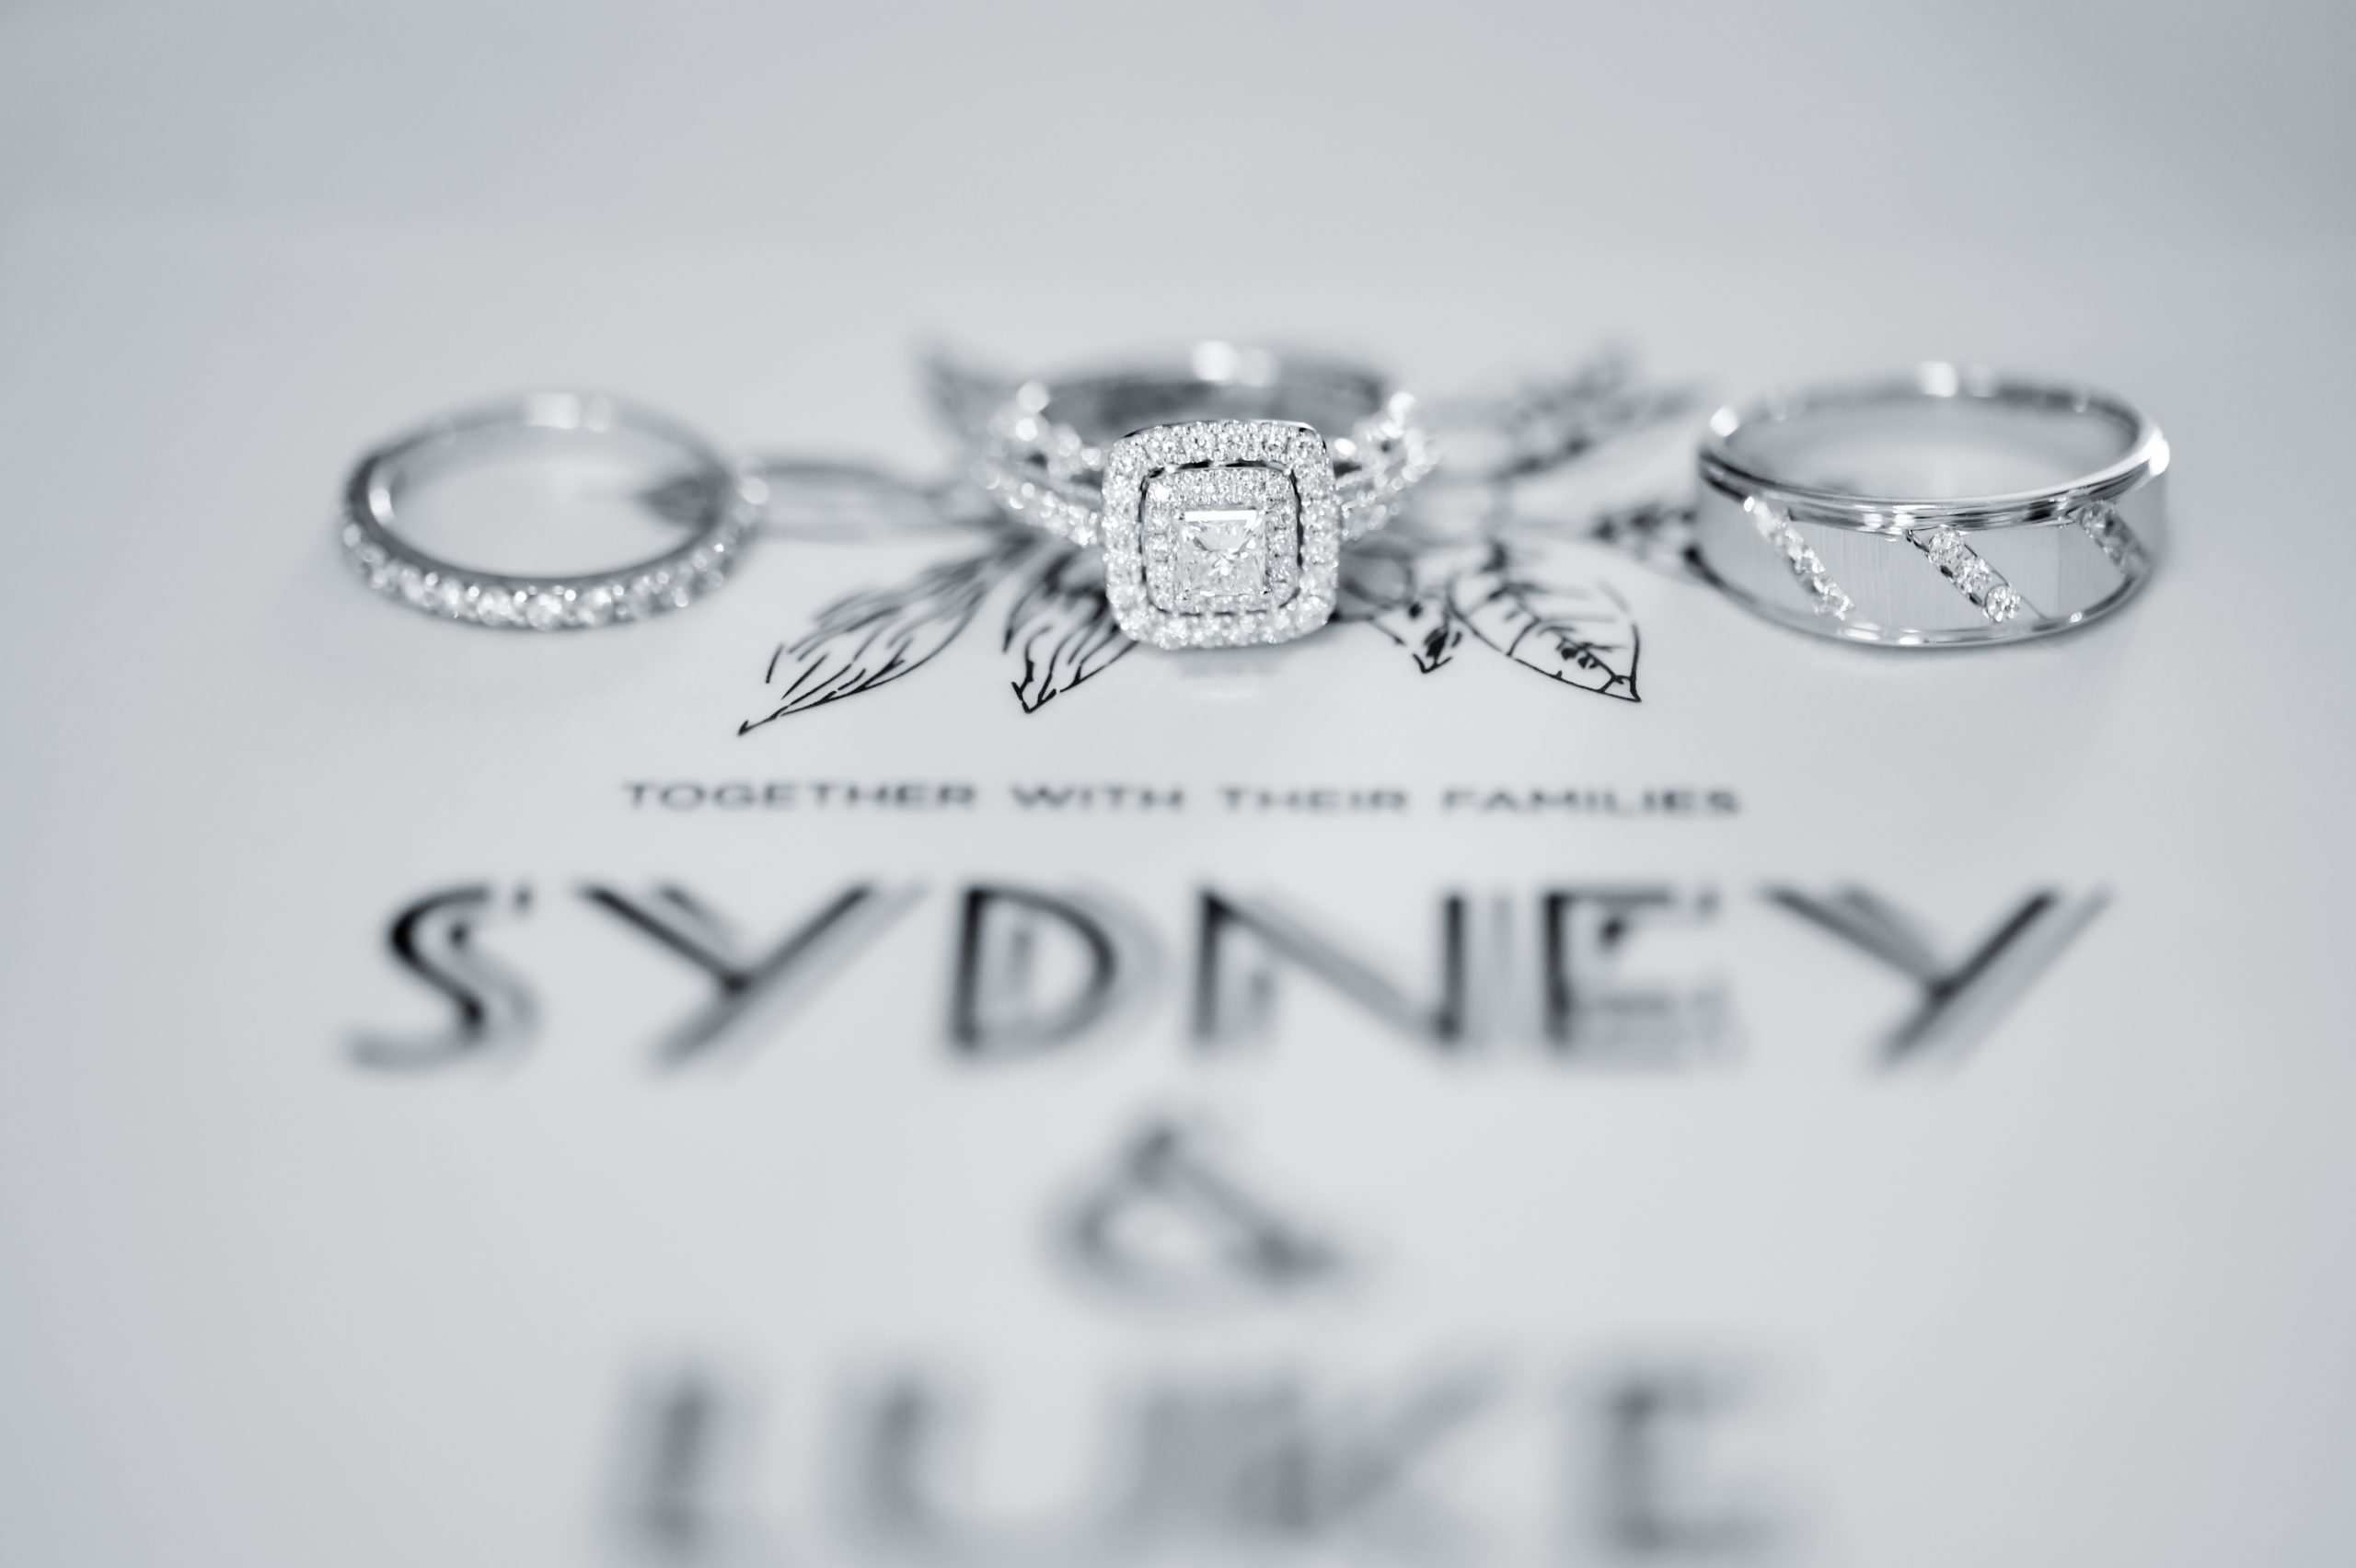 The stunning wedding rings displayed on the vellum invitaion